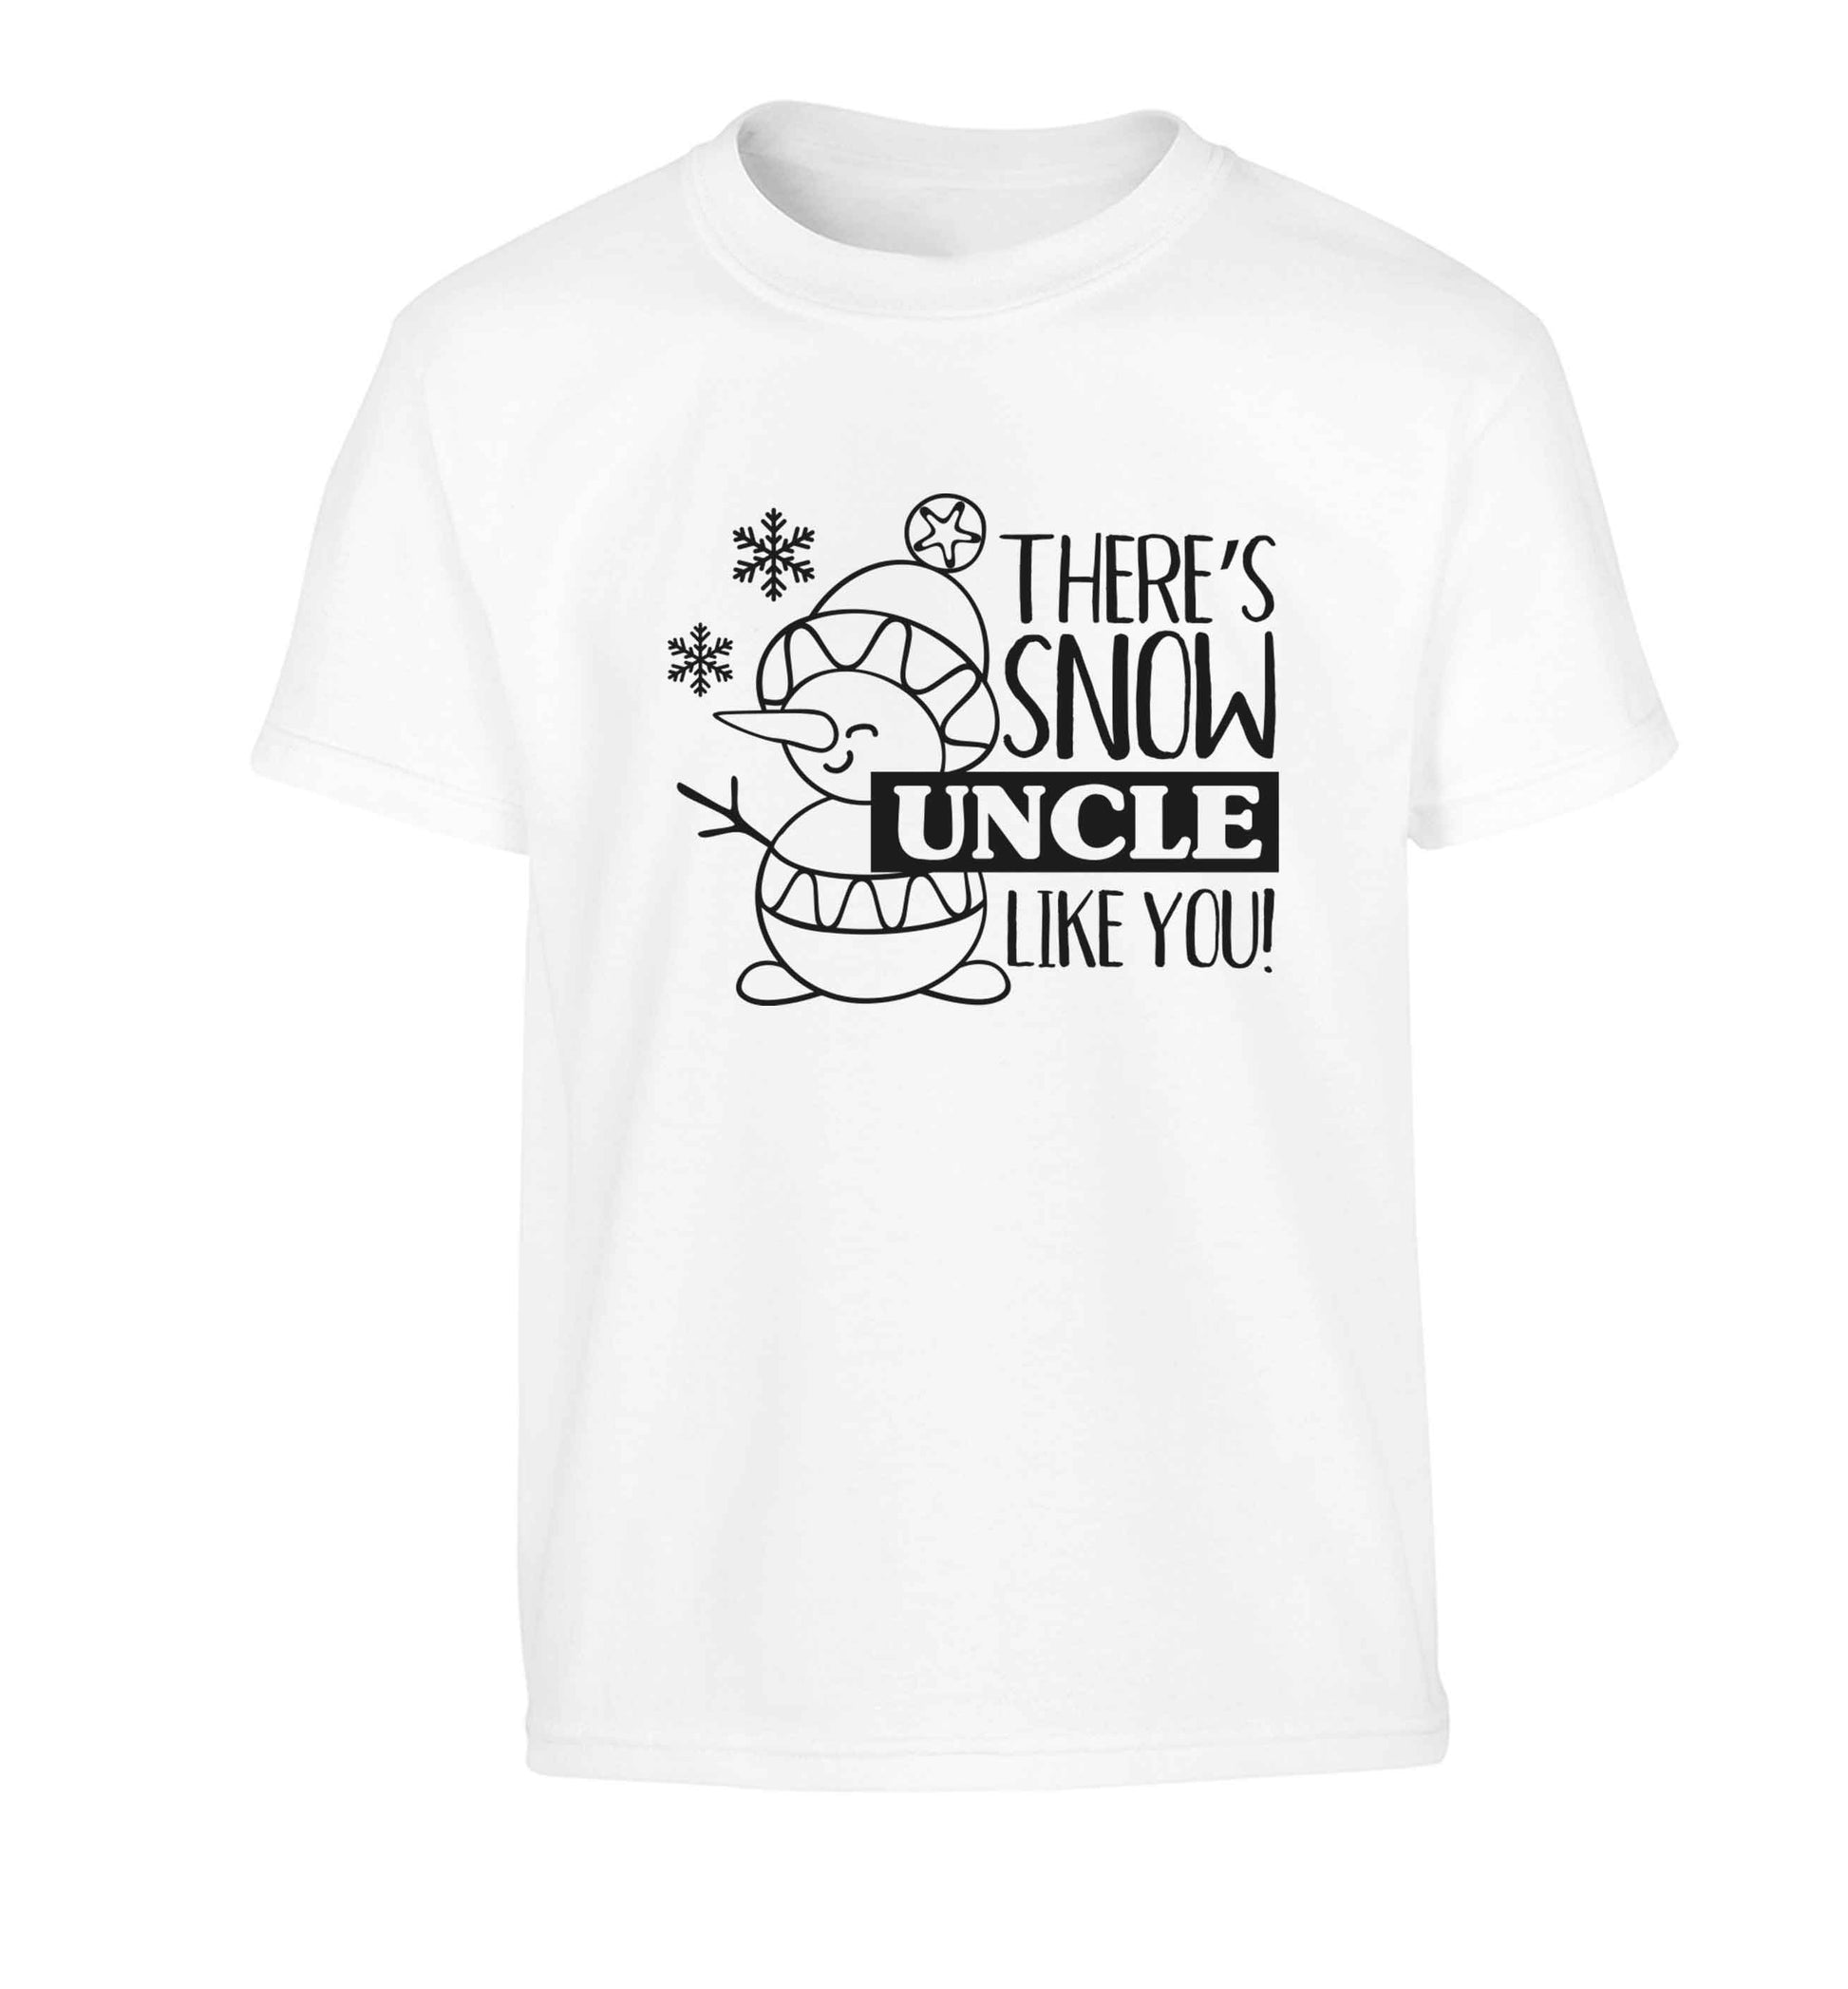 There's snow uncle like you Children's white Tshirt 12-13 Years